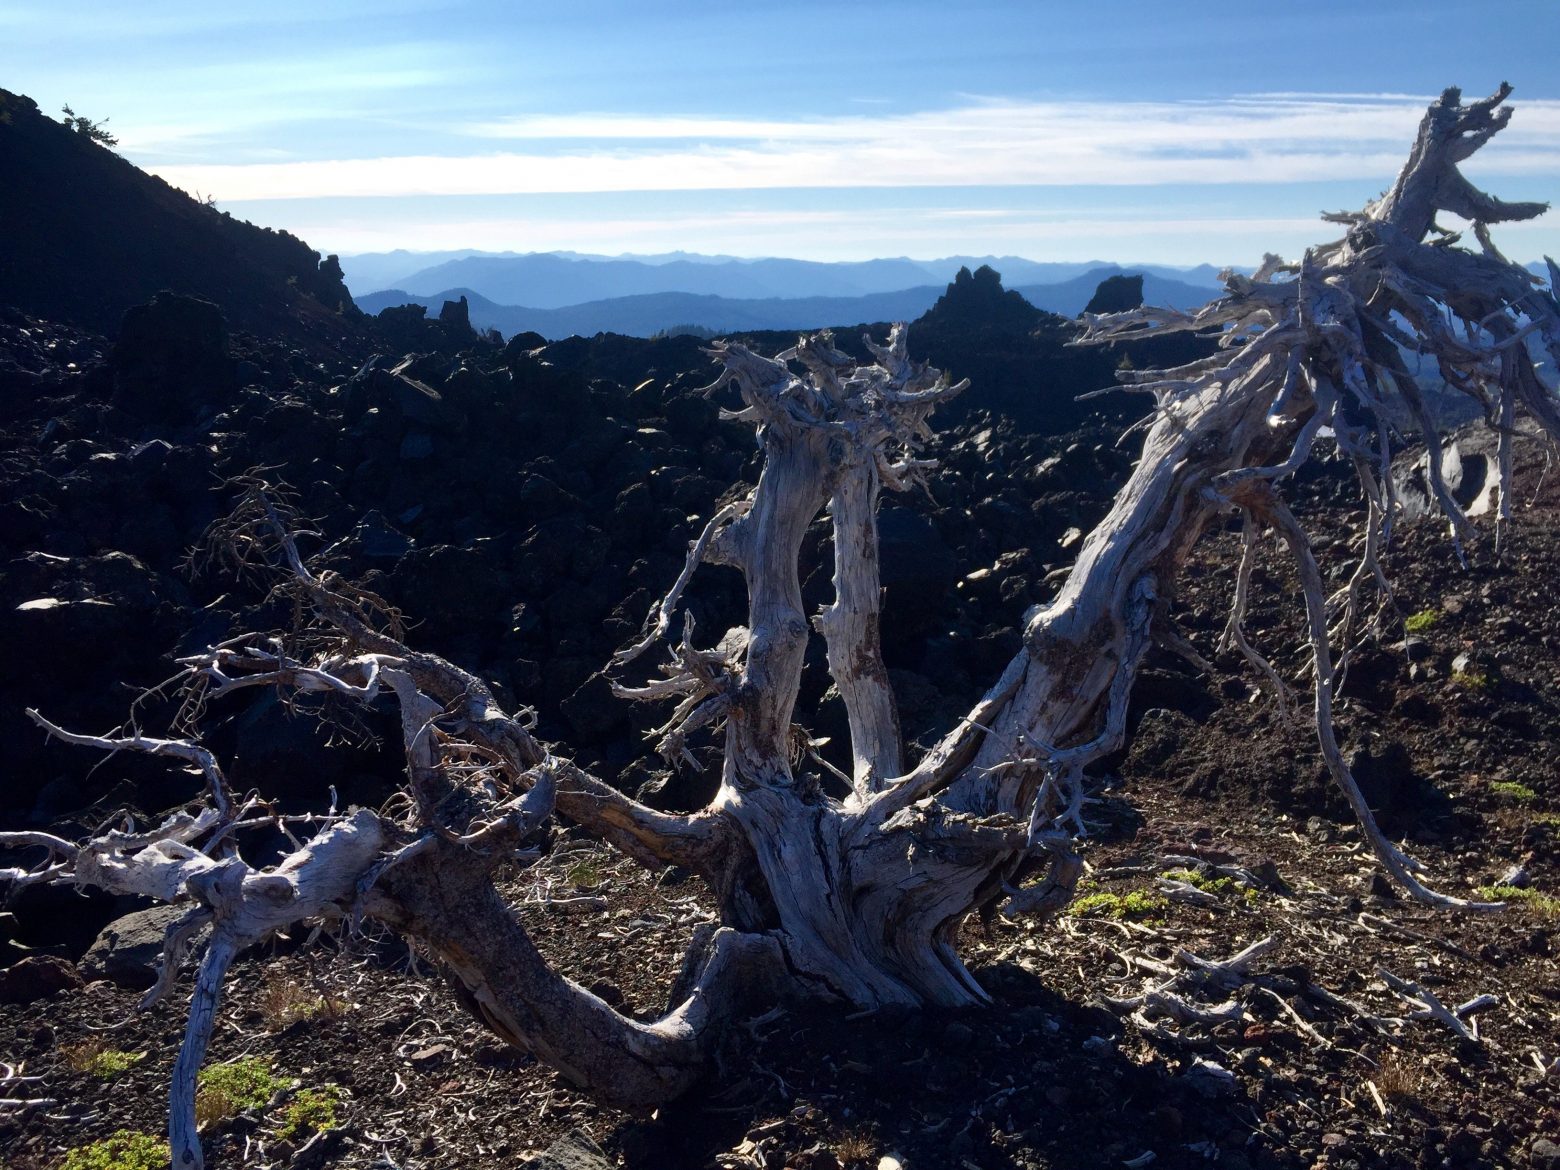 Deadwood and lava rocks in Three Sisters Wilderness